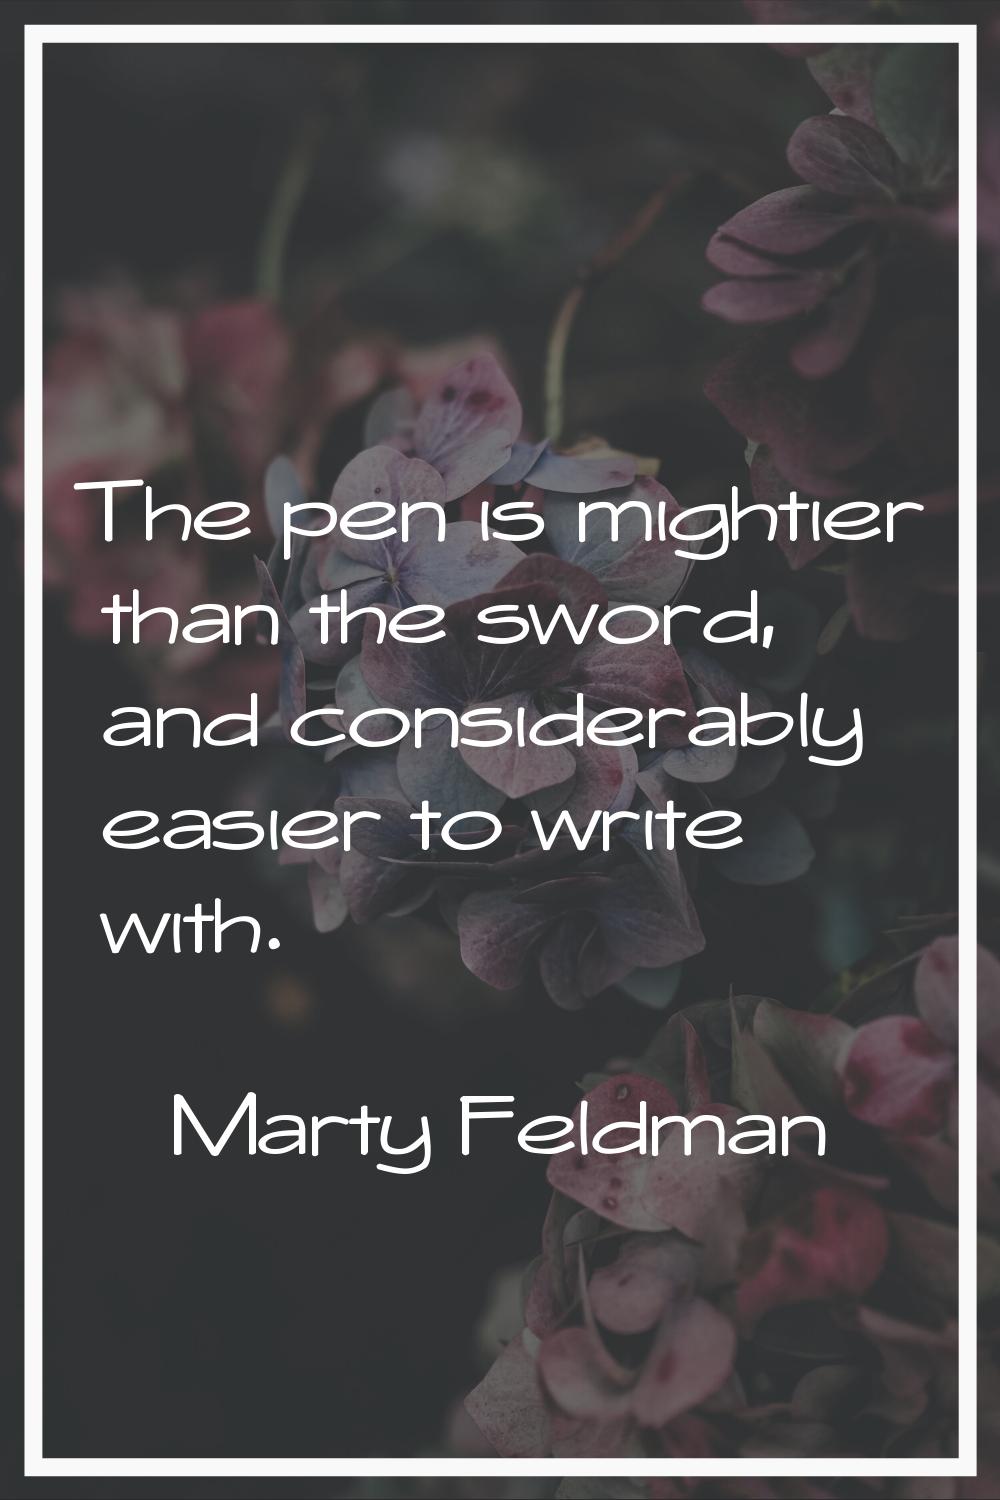 The pen is mightier than the sword, and considerably easier to write with.